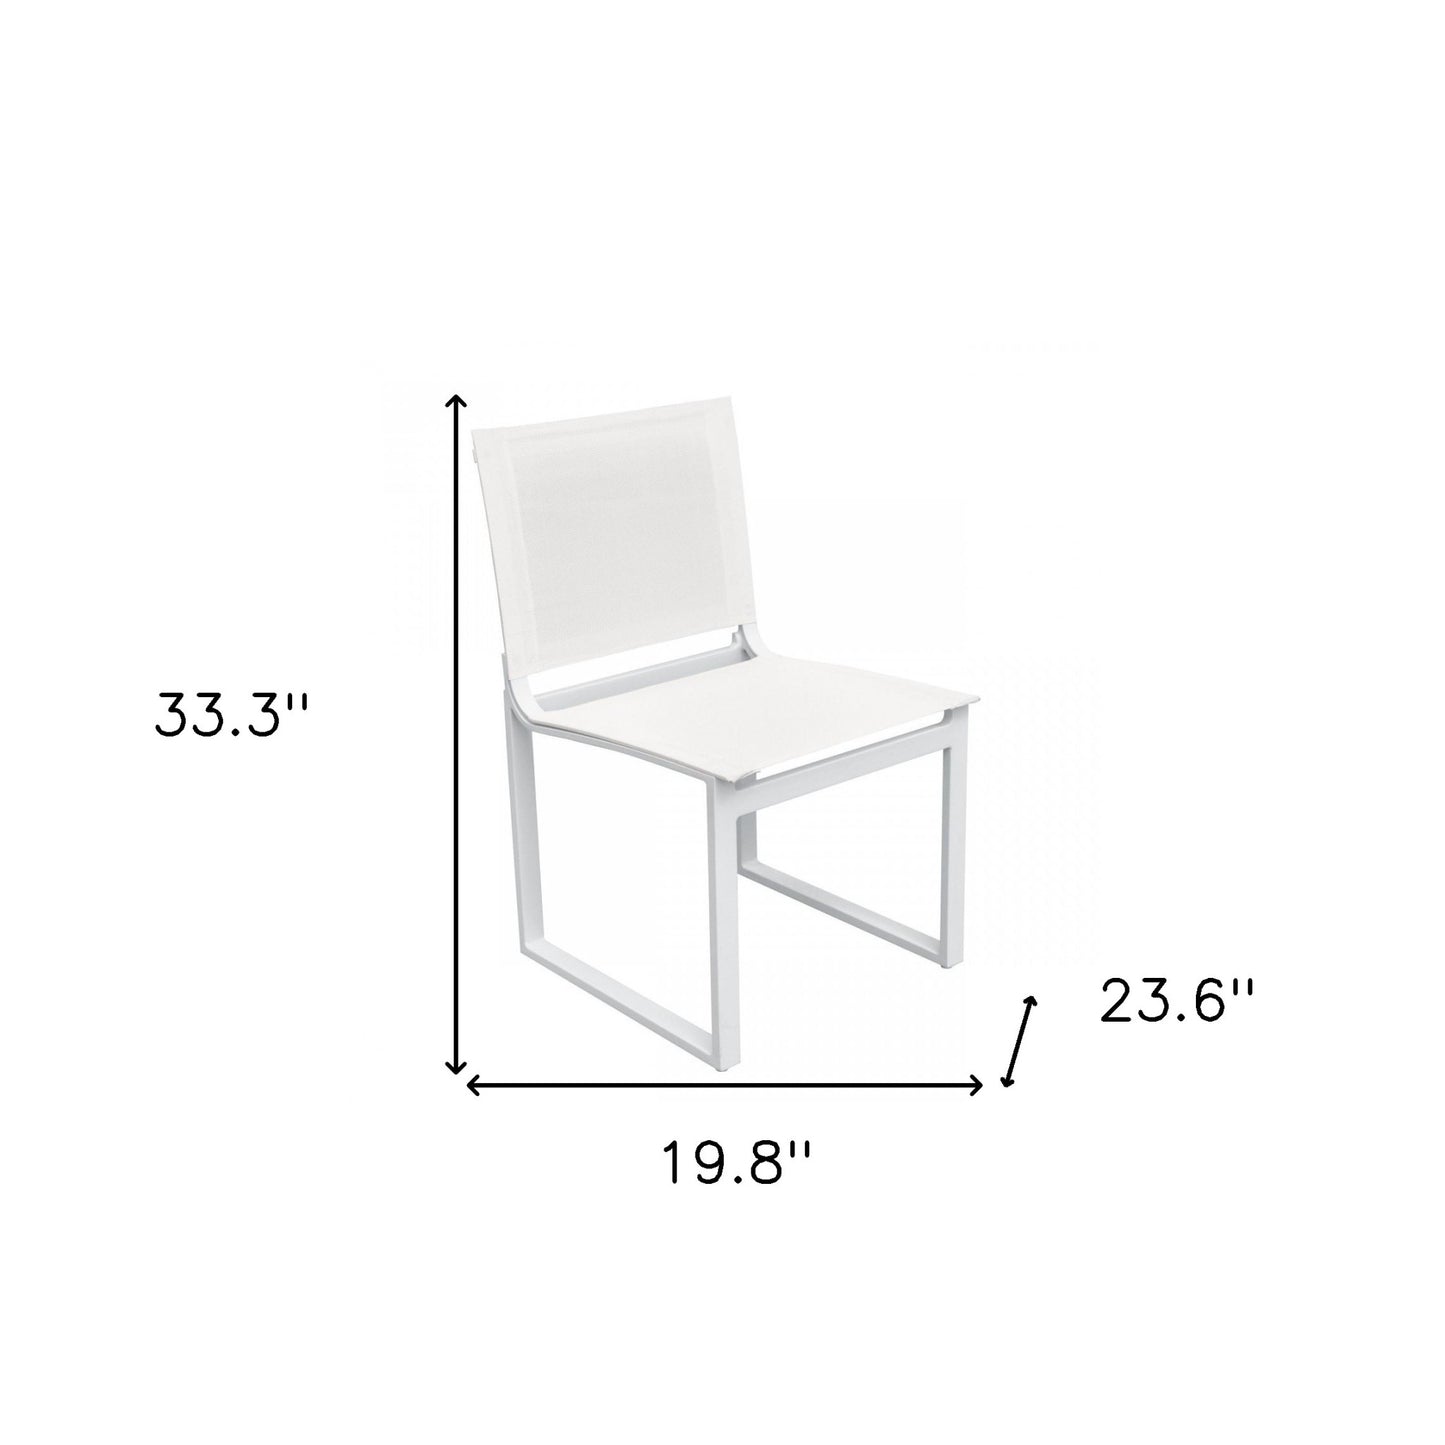 Set of Two 20" White Aluminum Indoor Outdoor Dining Chair